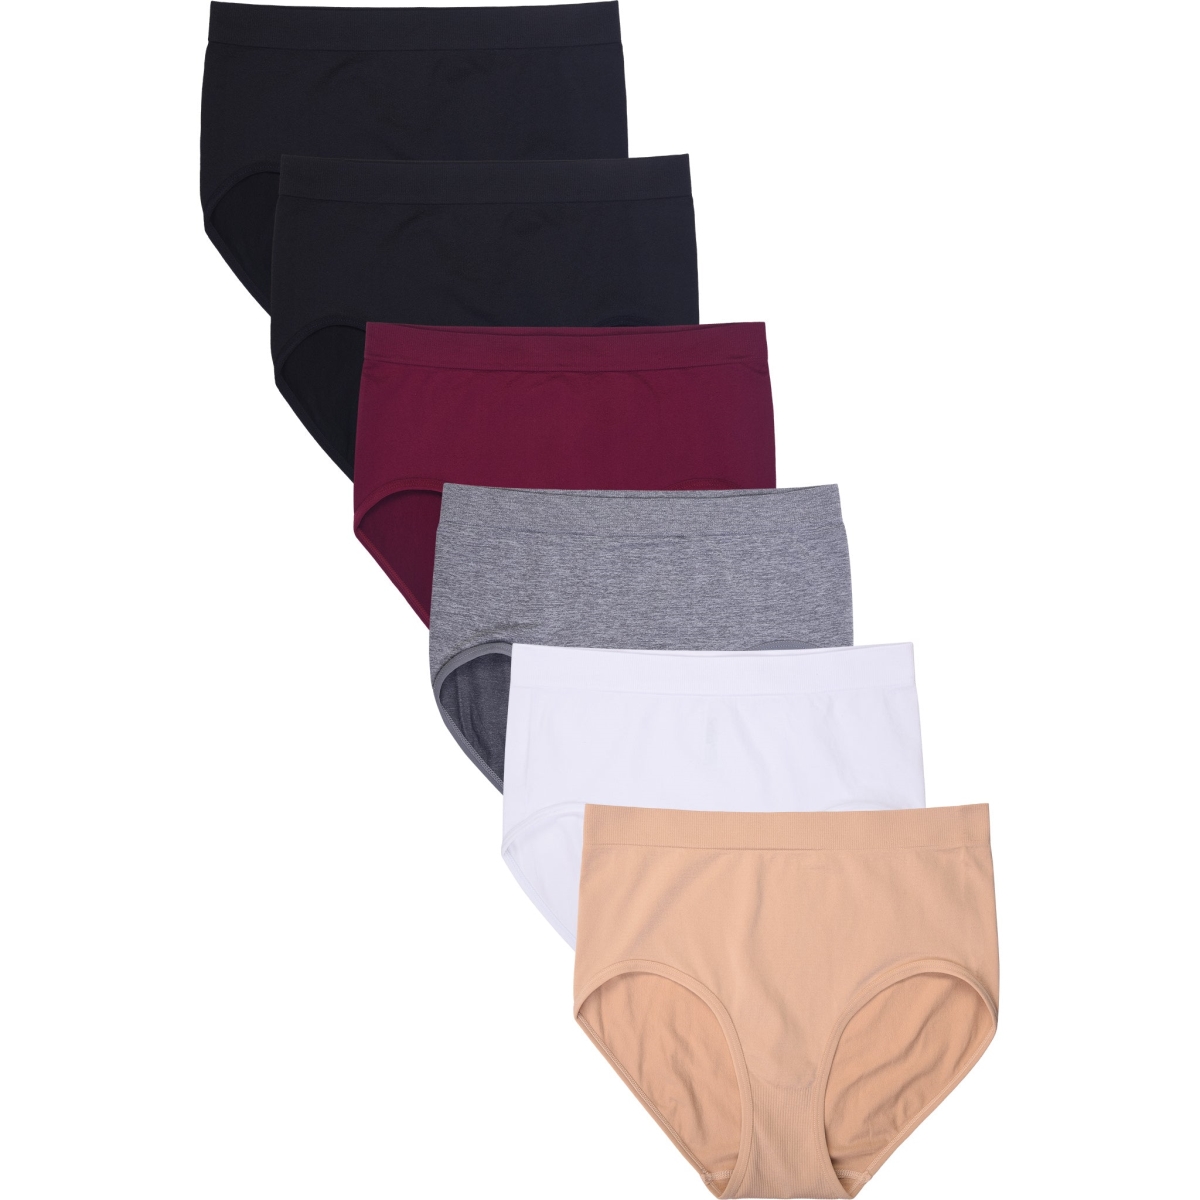 Picture of 247 Frenzy 247-LP0132SR9 Sofra Womens Essentials Seamless Nylon Stretch Brief Panty Underwear - Assorted Color - One Size - Pack of 6